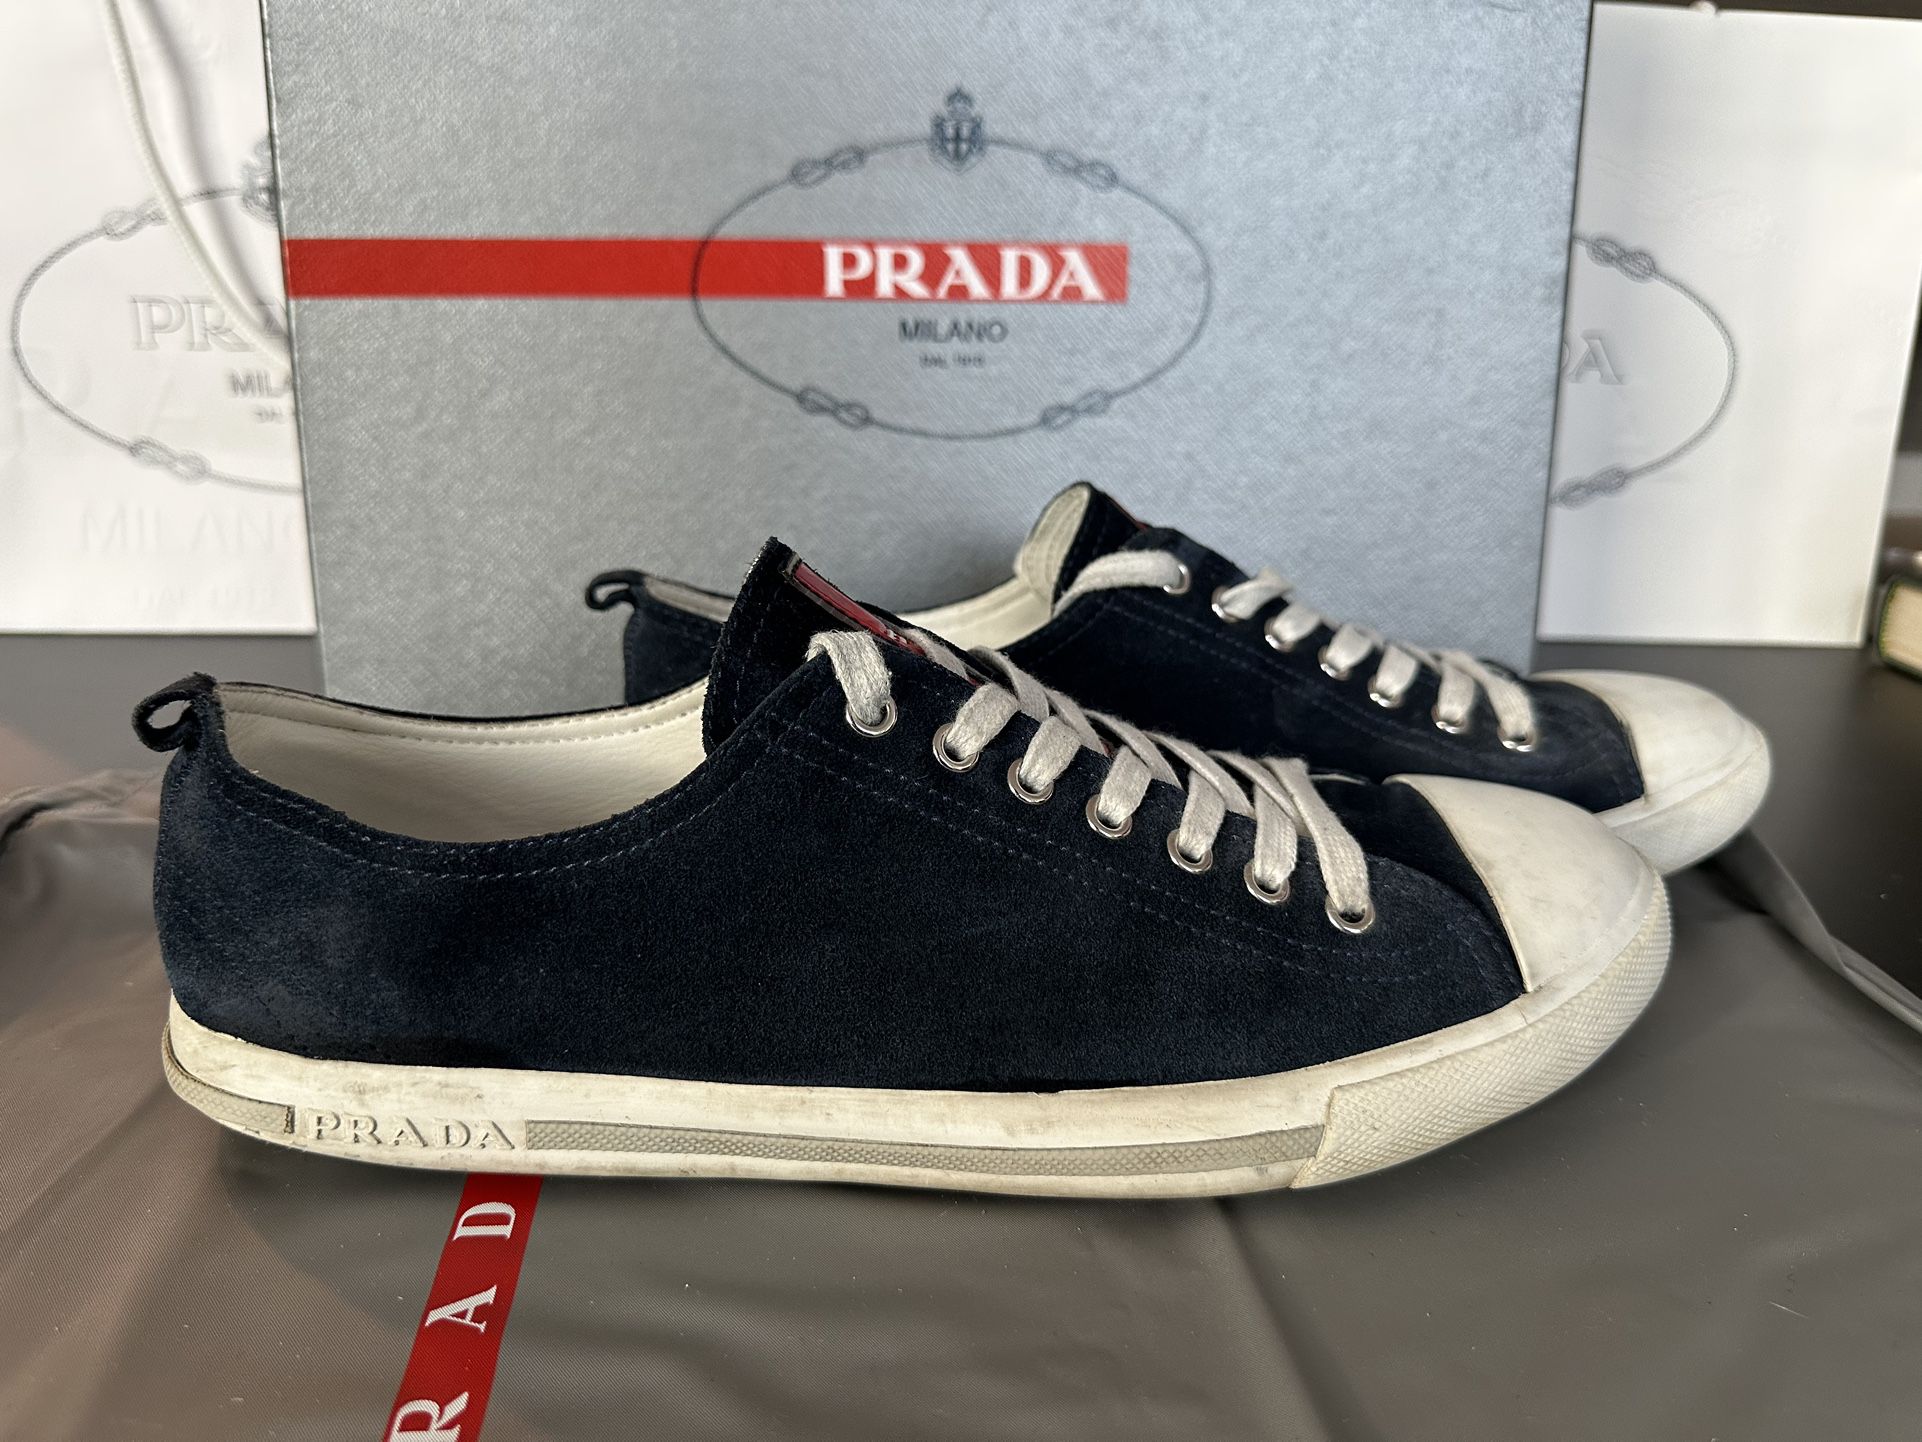 Prada Bowling Shirt & Prada American Cup Sneakers for Sale in New York, NY  - OfferUp